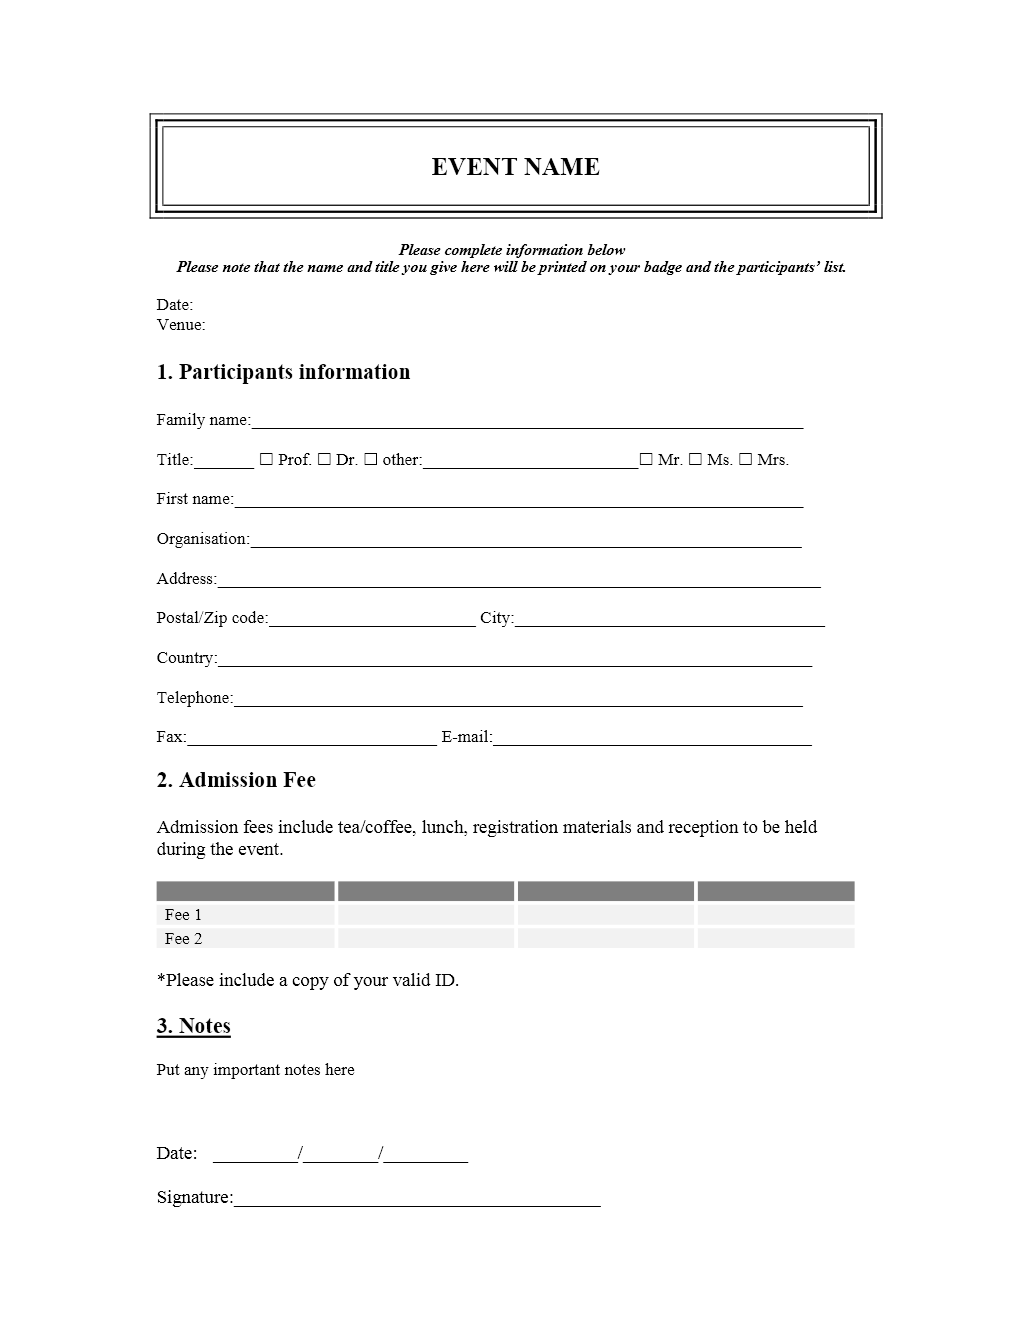 printable-event-registration-form-template-word-free-printable-templates